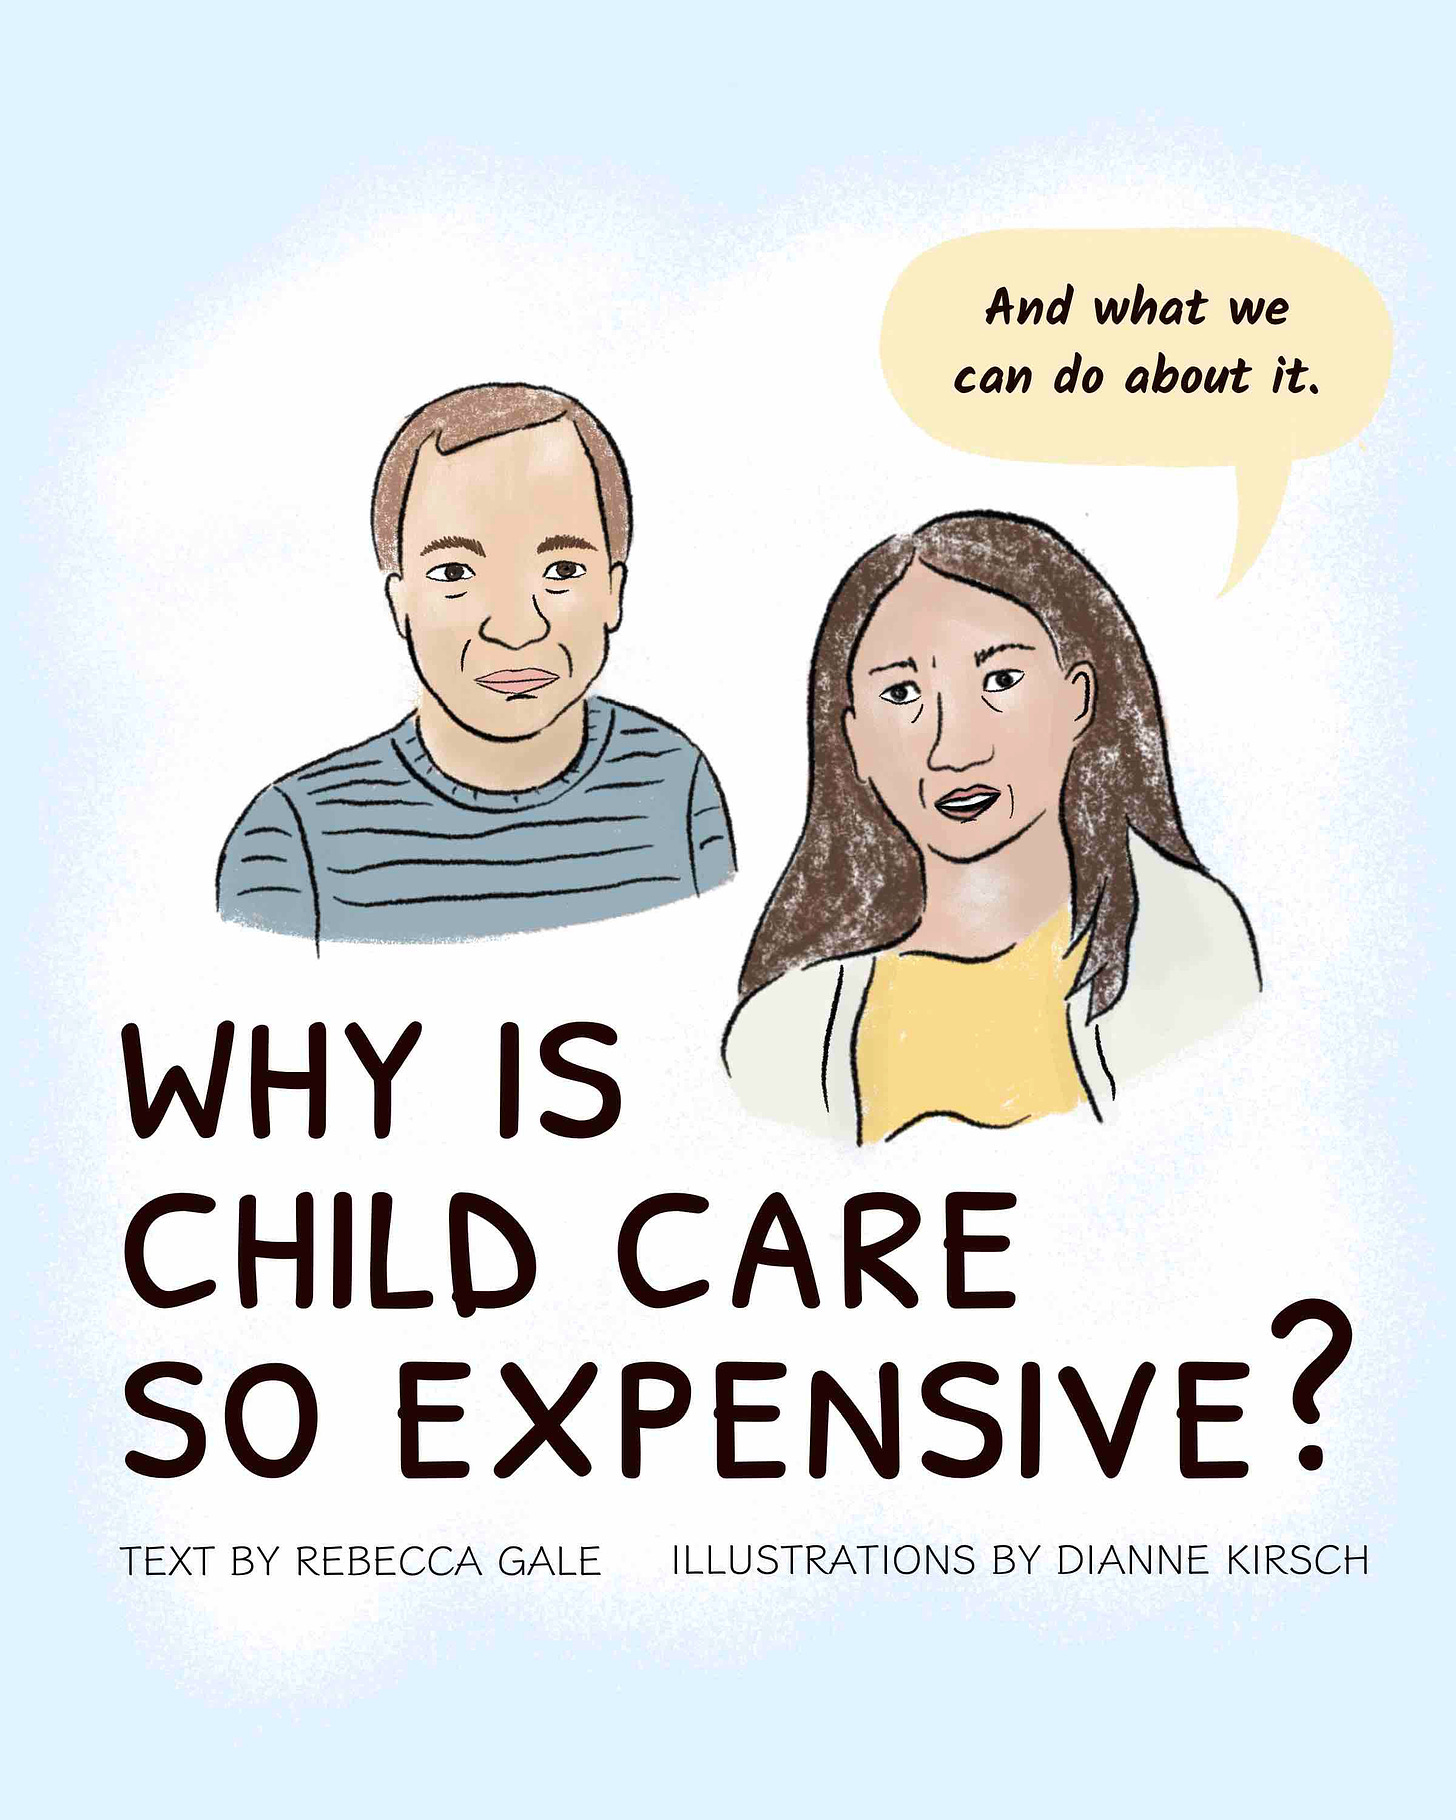 Why is Child Care So Expensive? What Can We Do About It.